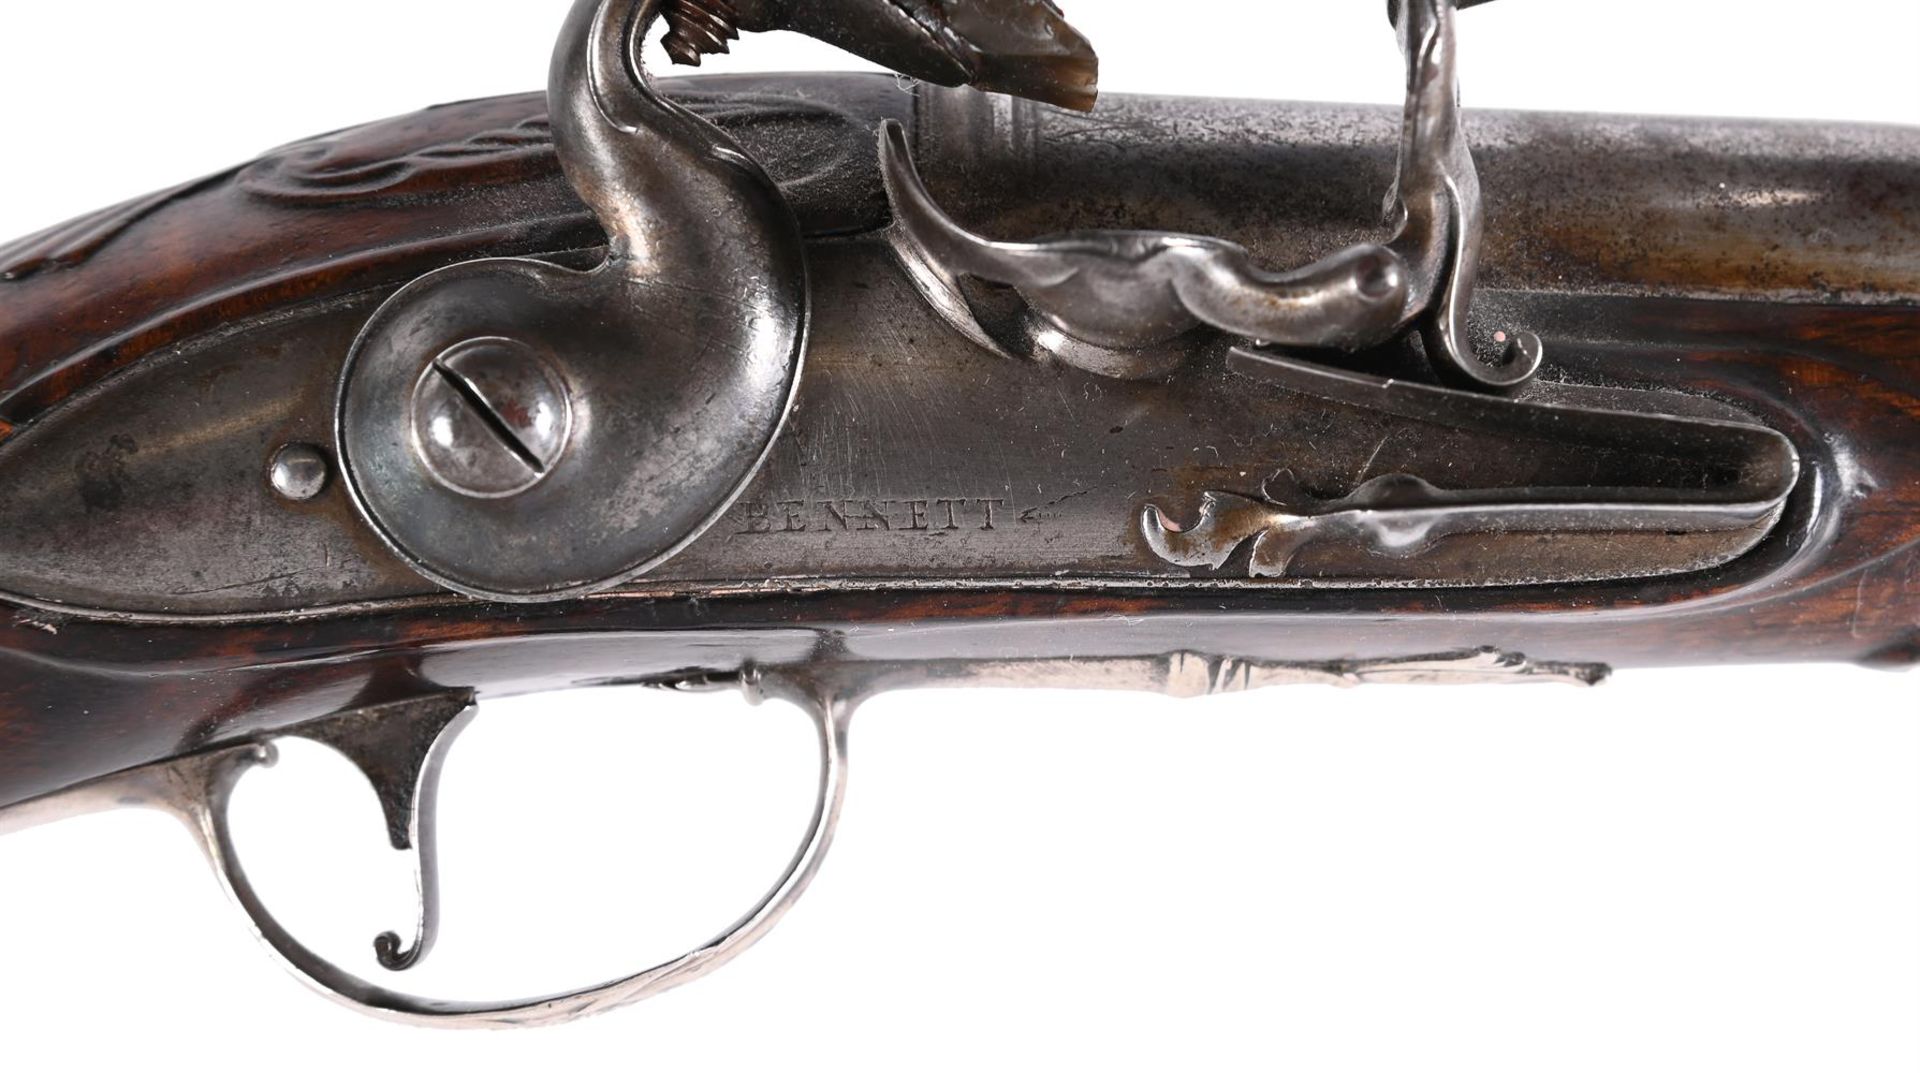 BENNETT LONDON; A PAIR OF WALNUT AND SILVER-METAL MOUNTED HOLSTER PISTOLS - Image 3 of 8